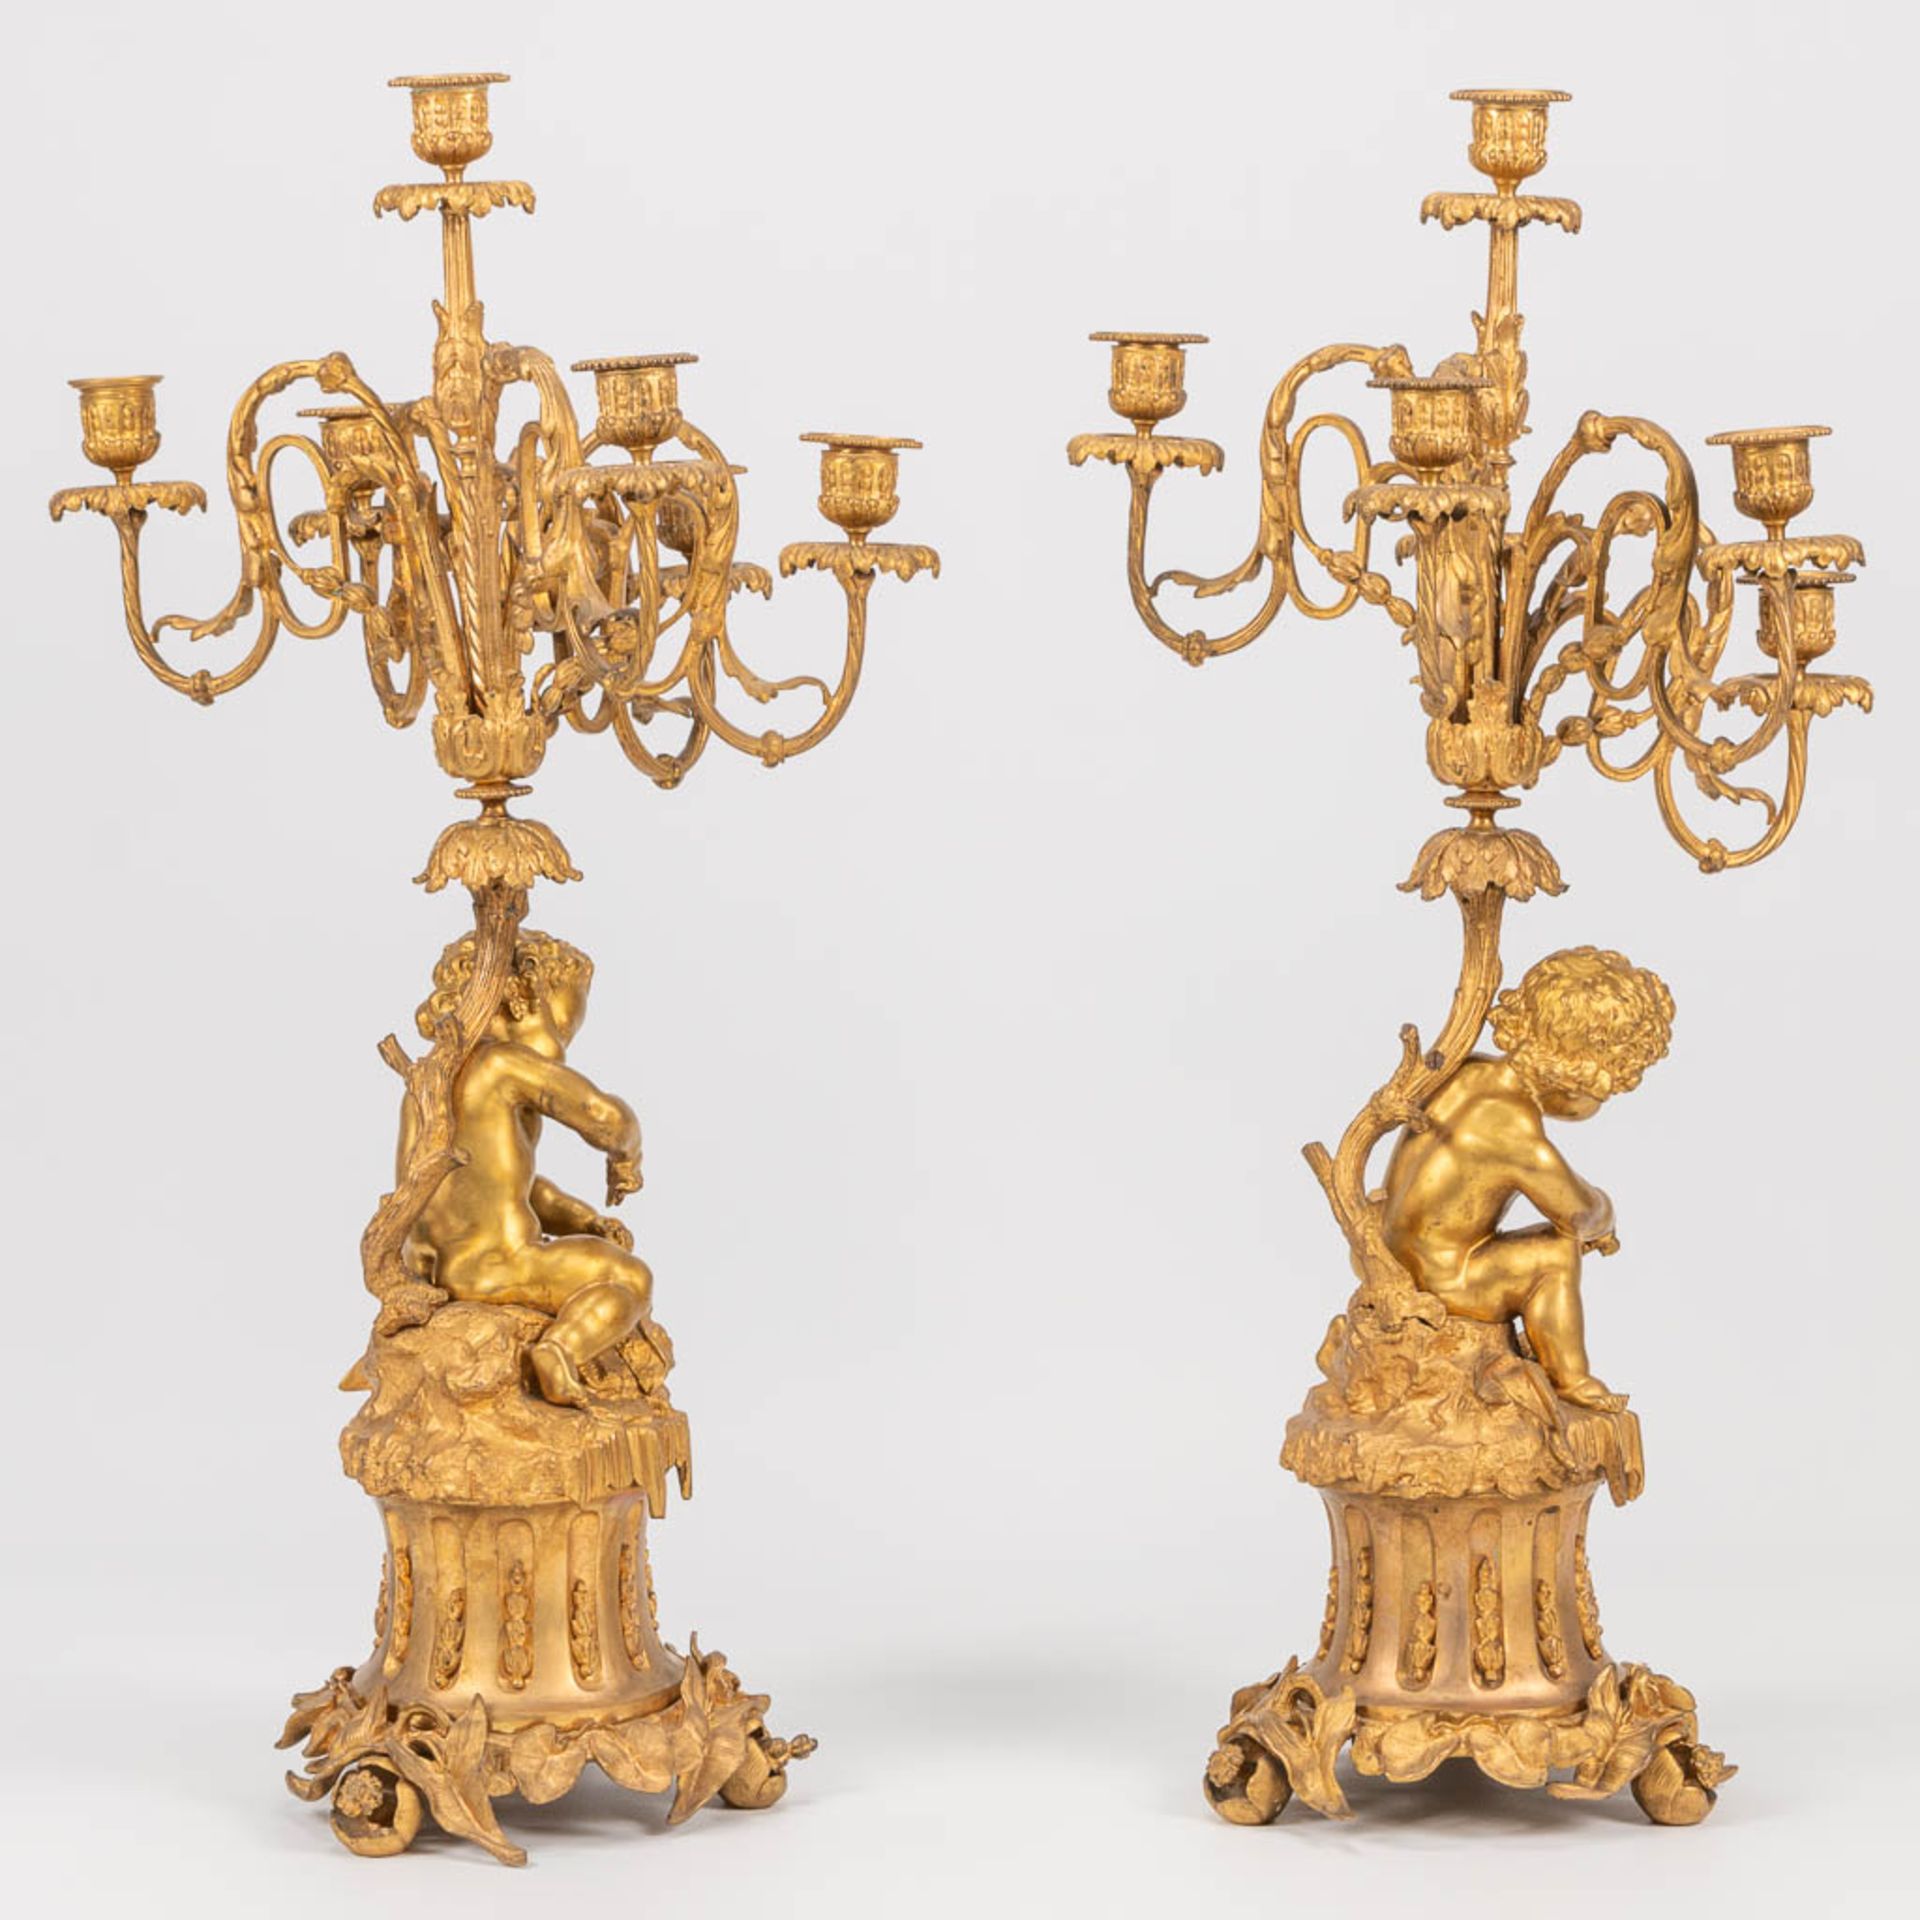 A pair of neoclassical candelabra decorated with putti, playing with pets. 19th century. (30 x 33 x  - Bild 3 aus 17